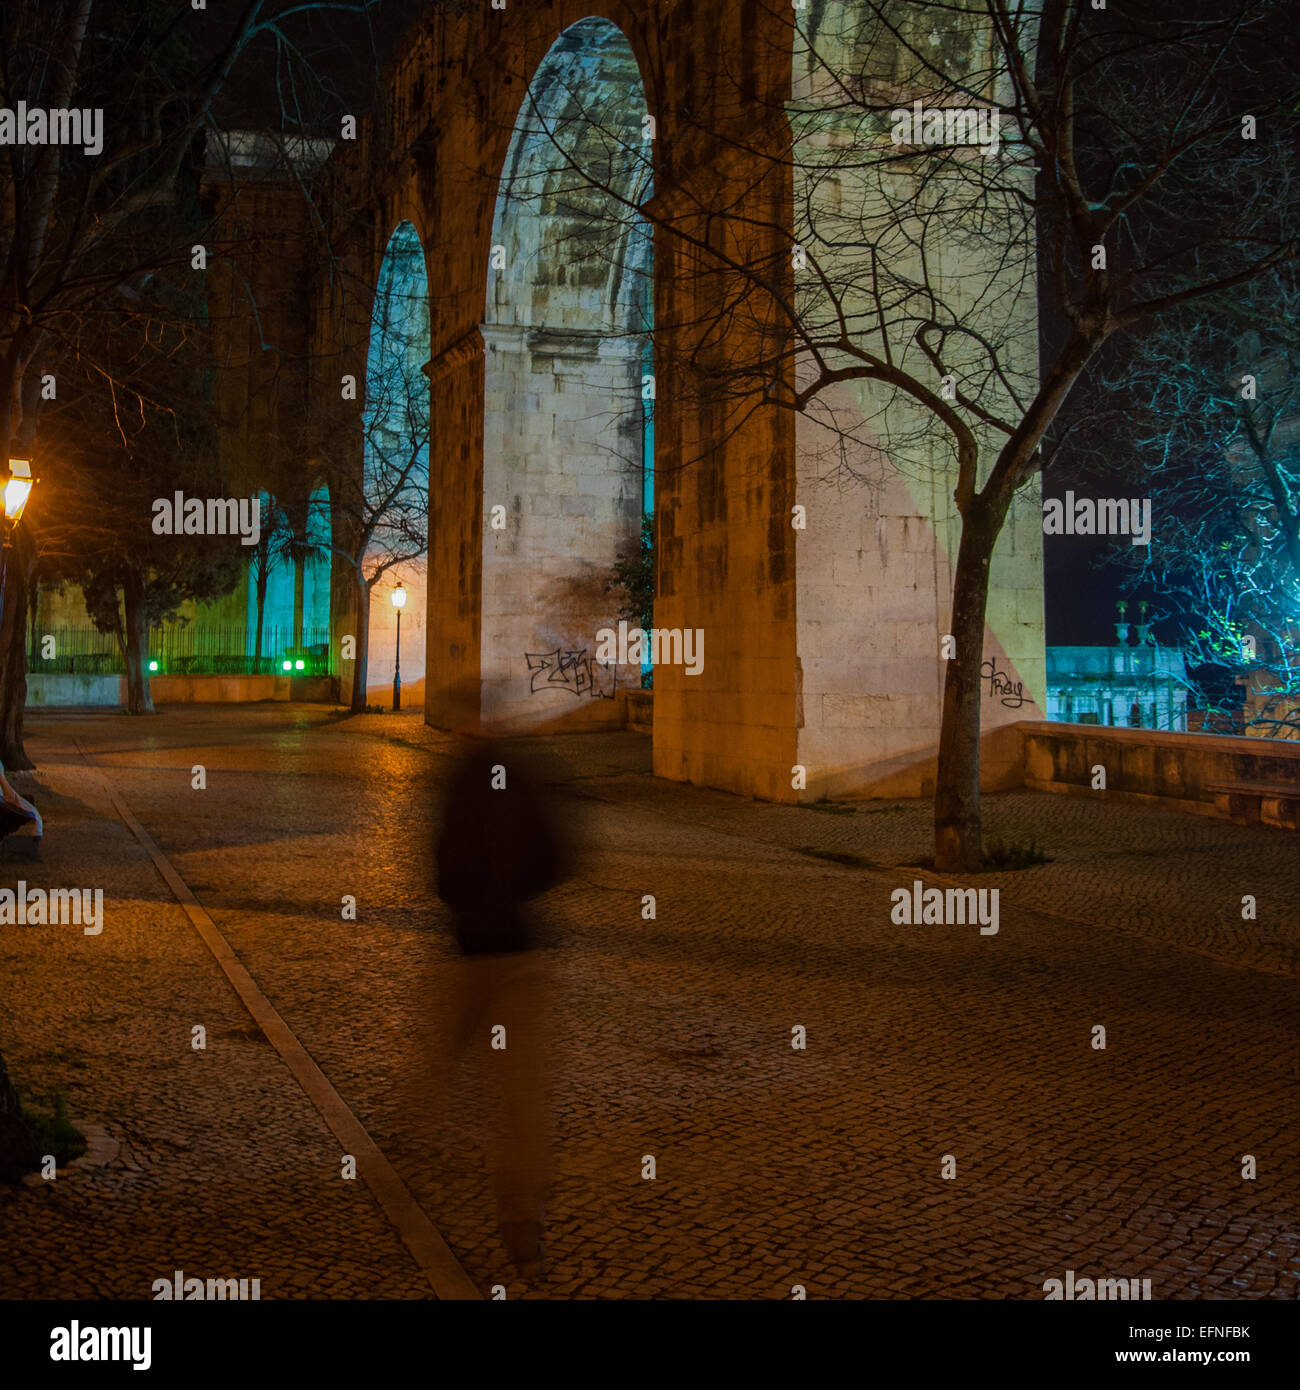 Night photography of a street with big stone arches in one side and a ghosted person. Stock Photo